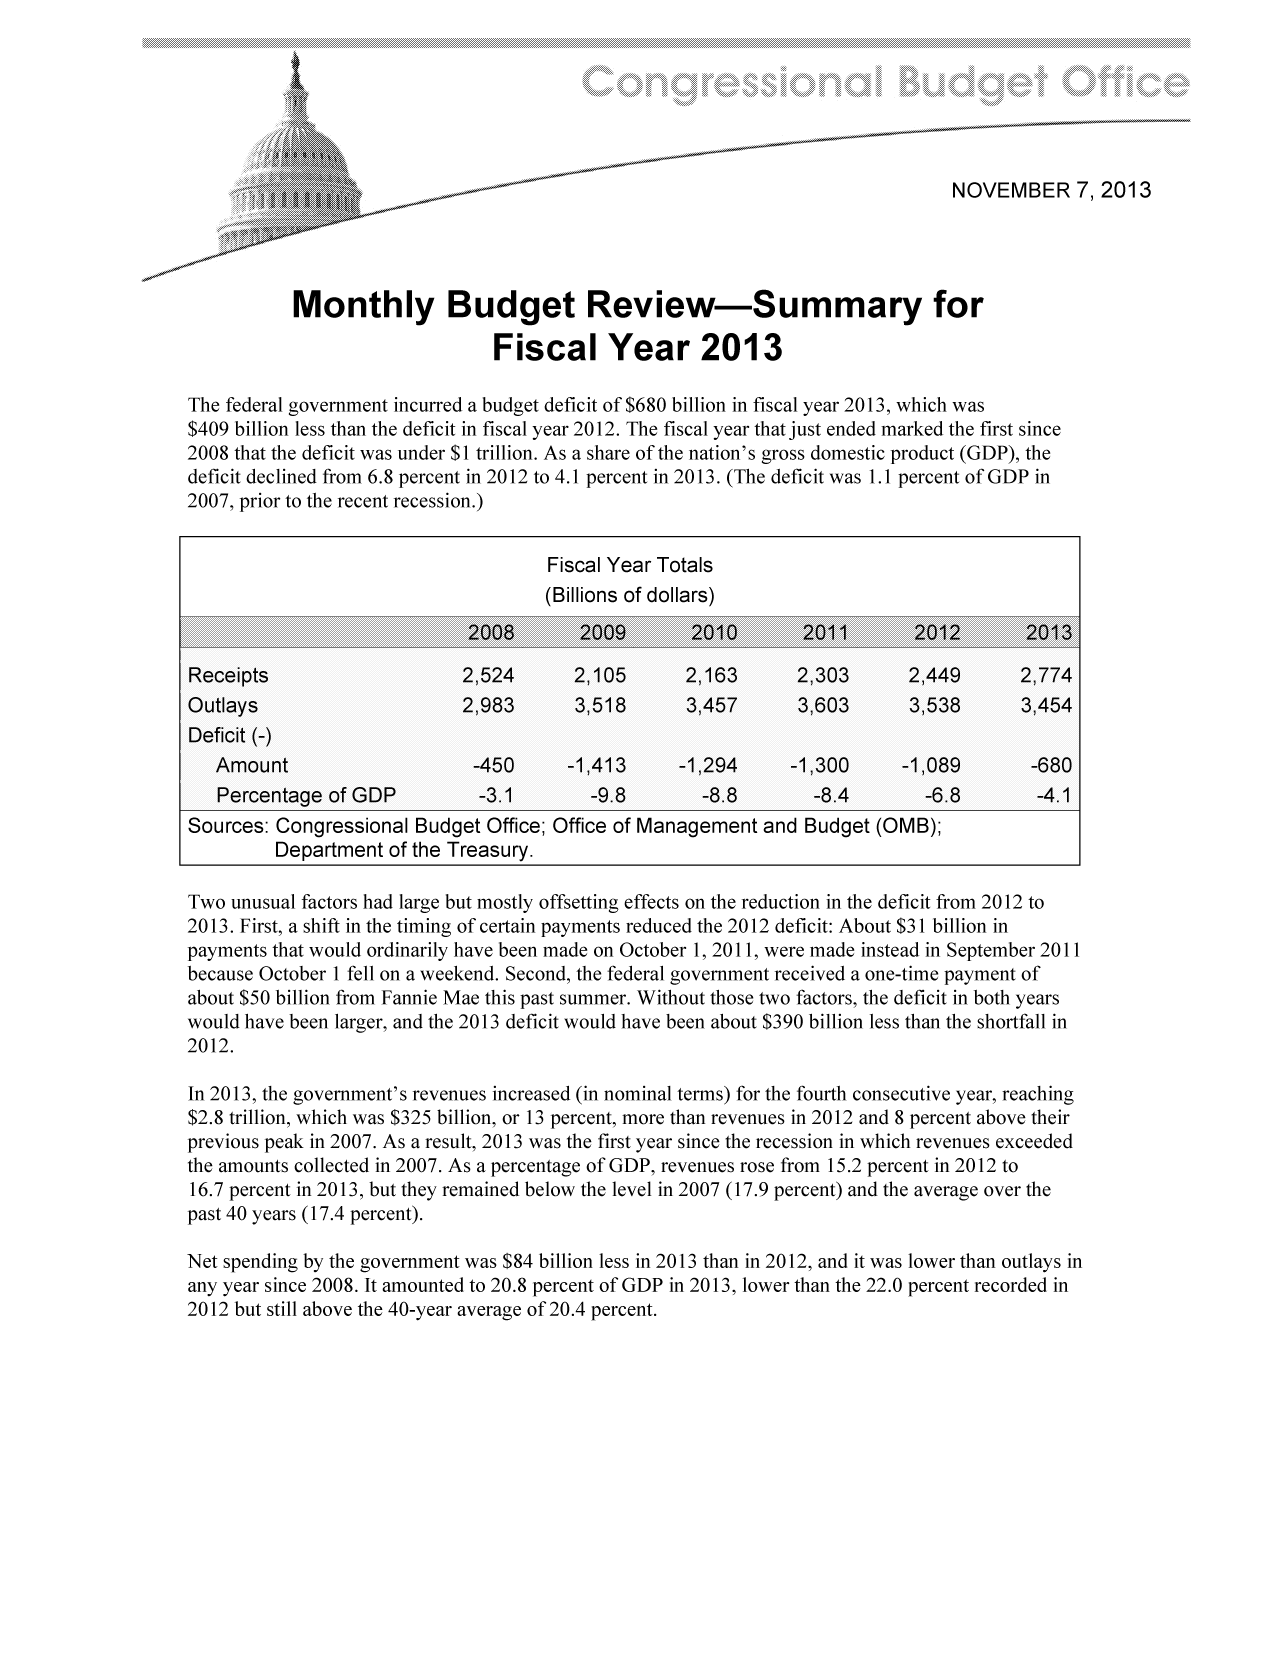 handle is hein.congrec/cbo11354 and id is 1 raw text is: .:.: ?       /  NOVEMBER 7 2013
Monthly Budget Review-Summary for
Fiscal Year 2013
The federal government incurred a budget deficit of $680 billion in fiscal year 2013, which was
$409 billion less than the deficit in fiscal year 2012. The fiscal year that just ended marked the first since
2008 that the deficit was under $1 trillion. As a share of the nation's gross domestic product (GDP), the
deficit declined from 6.8 percent in 2012 to 4.1 percent in 2013. (The deficit was 1.1 percent of GDP in
2007, prior to the recent recession.)
Fiscal Year Totals
(Billions of dollars)
Receipts                       2,524       2,105        2,163       2,303       2,449        2,774
.. . . . . . . . .........  a y .................................................................................................. ......................... ...................... .. .. .. .. .. . ...8 3. .. .. .., 5.. .. . .. .. ..,. .. .. .. .. . .. .. .. .. .. 3 , 5 3 8.. . .. .. ...3.. .. .. .. .
D e f i c i t   ( -)........................................................................................................
Amount                         -450      -1,413      -1t,294      -1,300      -1,089        -680
Percentage of GDP              -3.1        -9.8         -8.8        -8.4        -6.8         -4.1
Sources: Congressional Budget Office; Office of Management and Budget (0MB);
Department of the Treasury.
Two unusual factors had large but mostly offsetting effects on the reduction in the deficit from 2012 to
2013. First, a shift in the timing of certain payments reduced the 2012 deficit: About $31 billion in
payments that would ordinarily have been made on October 1, 2011, were made instead in September 2011
because October 1 fell on a weekend. Second, the federal government received a one-time payment of
about $50 billion from Fannie Mae this past summer. Without those two factors, the deficit in both years
would have been larger, and the 2013 deficit would have been about $390 billion less than the shortfall in
2012.
In 2013, the government' s revenues increased (in nominal terms) for the fourth consecutive year, reaching
$2.8 trillion, which was $325 billion, or 13 percent, more than revenues in 2012 and 8 percent above their
previous peak in 2007. As a result, 2013 was the first year since the recession in which revenues exceeded
the amounts collected in 2007. As a percentage of GDP, revenues rose from 15.2 percent in 2012 to
16.7 percent in 2013, but they remained below the level in 2007 (17.9 percent) and the average over the
past 40 years (17.4 percent).
Net spending by the government was $84 billion less in 2013 than in 2012, and it was lower than outlays in
any year since 2008. It amounted to 20.8 percent of GDP in 2013, lower than the 22.0 percent recorded in
2012 but still above the 40-year average of 20.4 percent.


